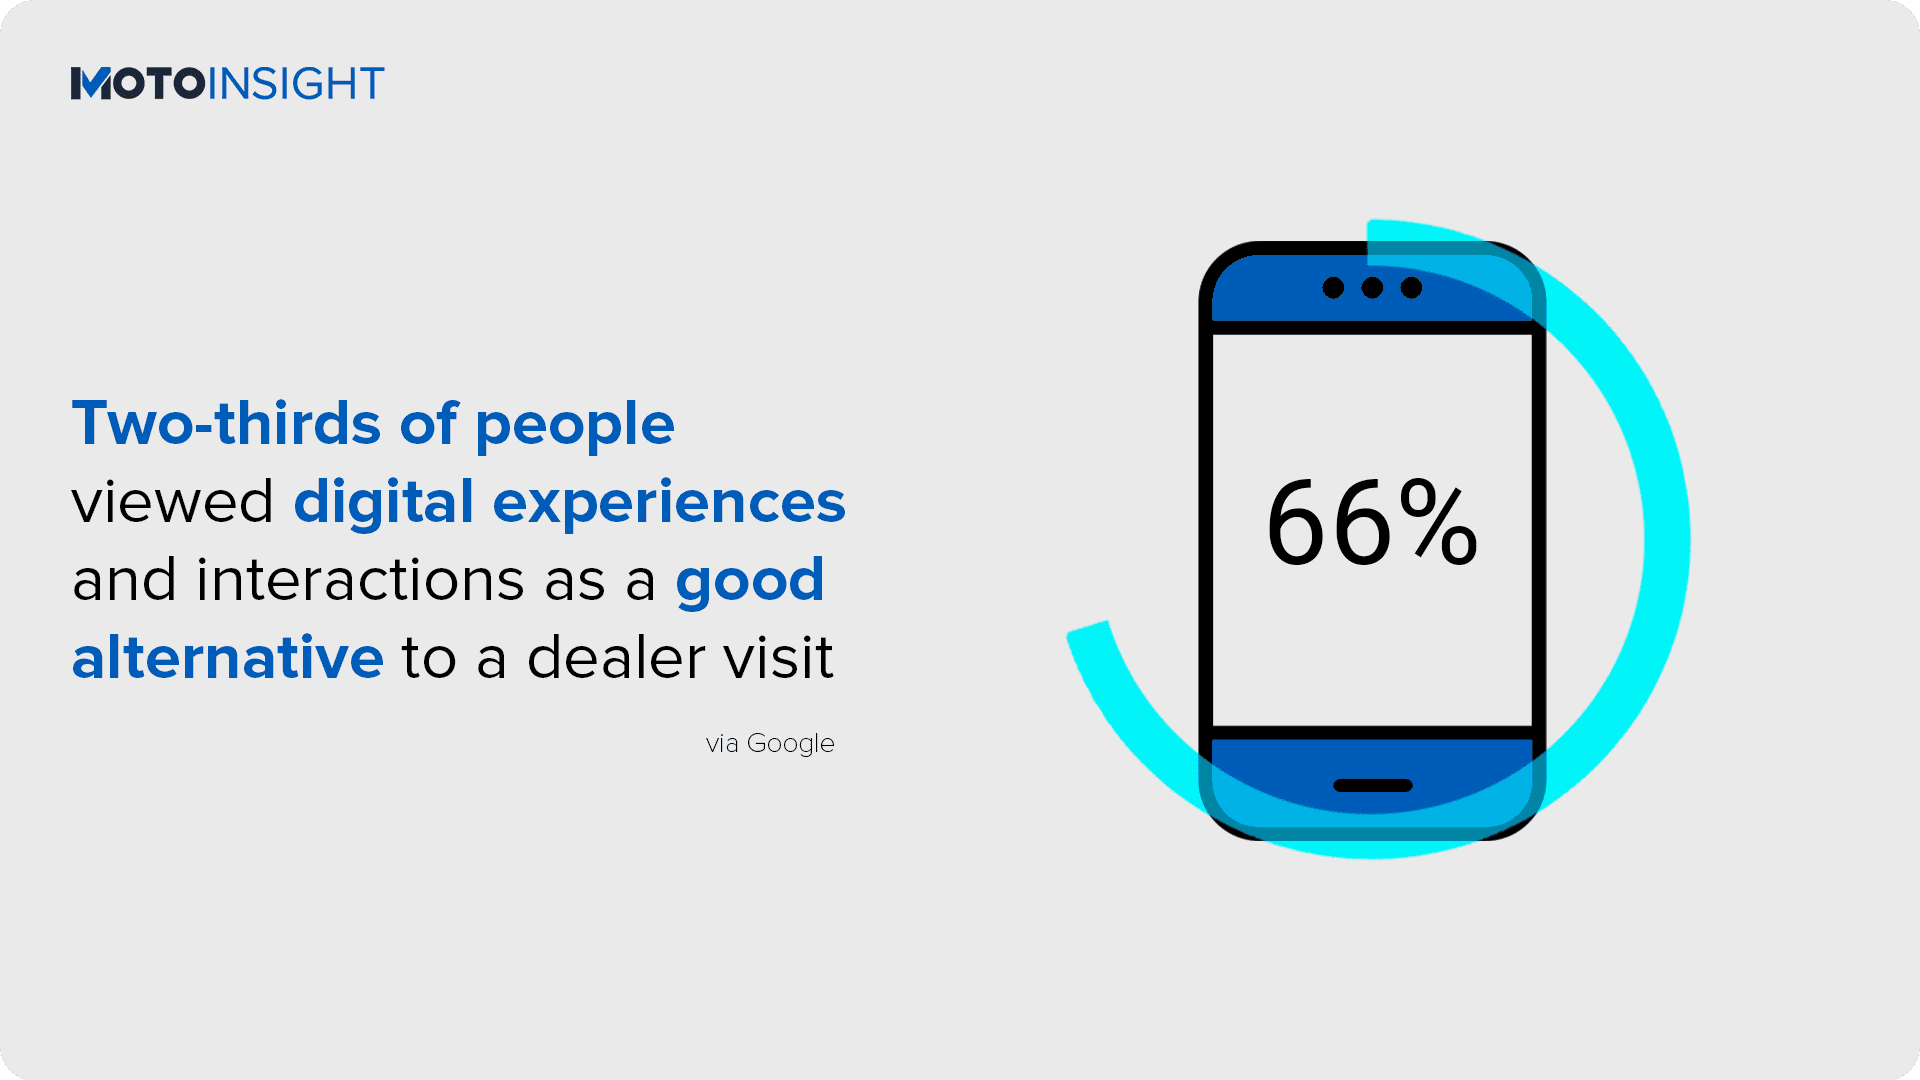 Two-thirds of people viewed digital experiences and interactions as a good alternative to a dealer visit